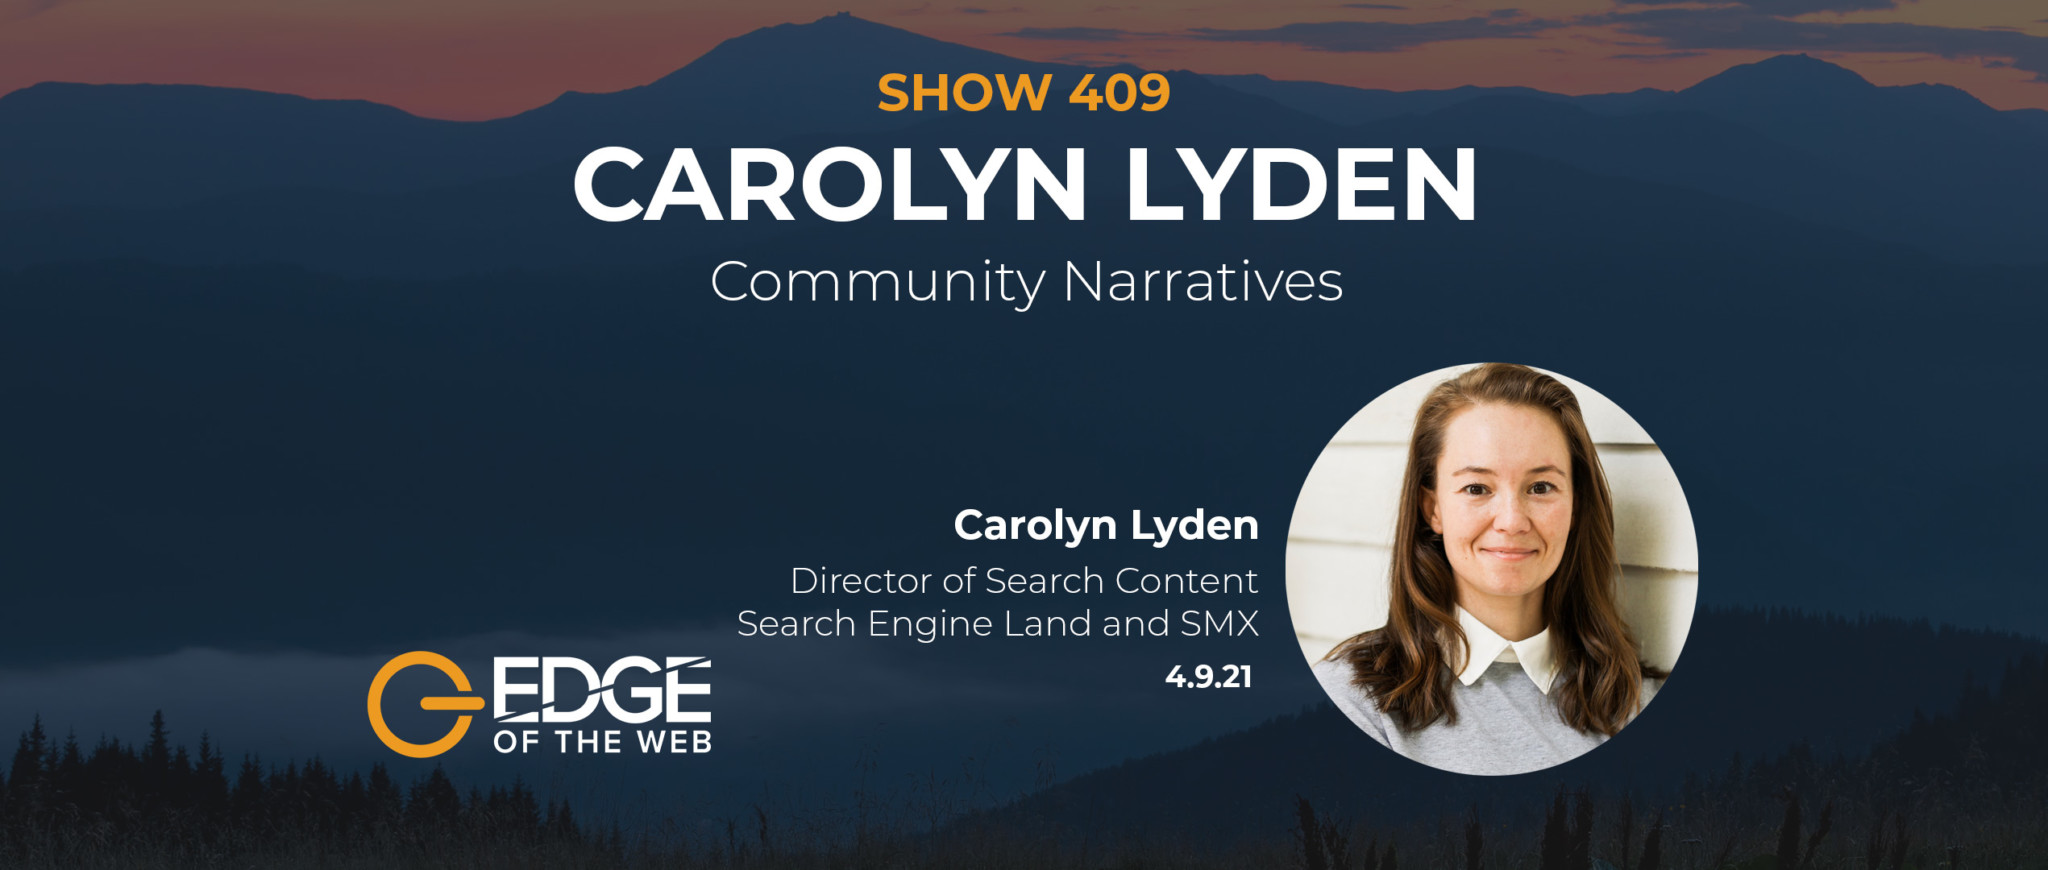 Carolyn Lyden EP409 Featured Image